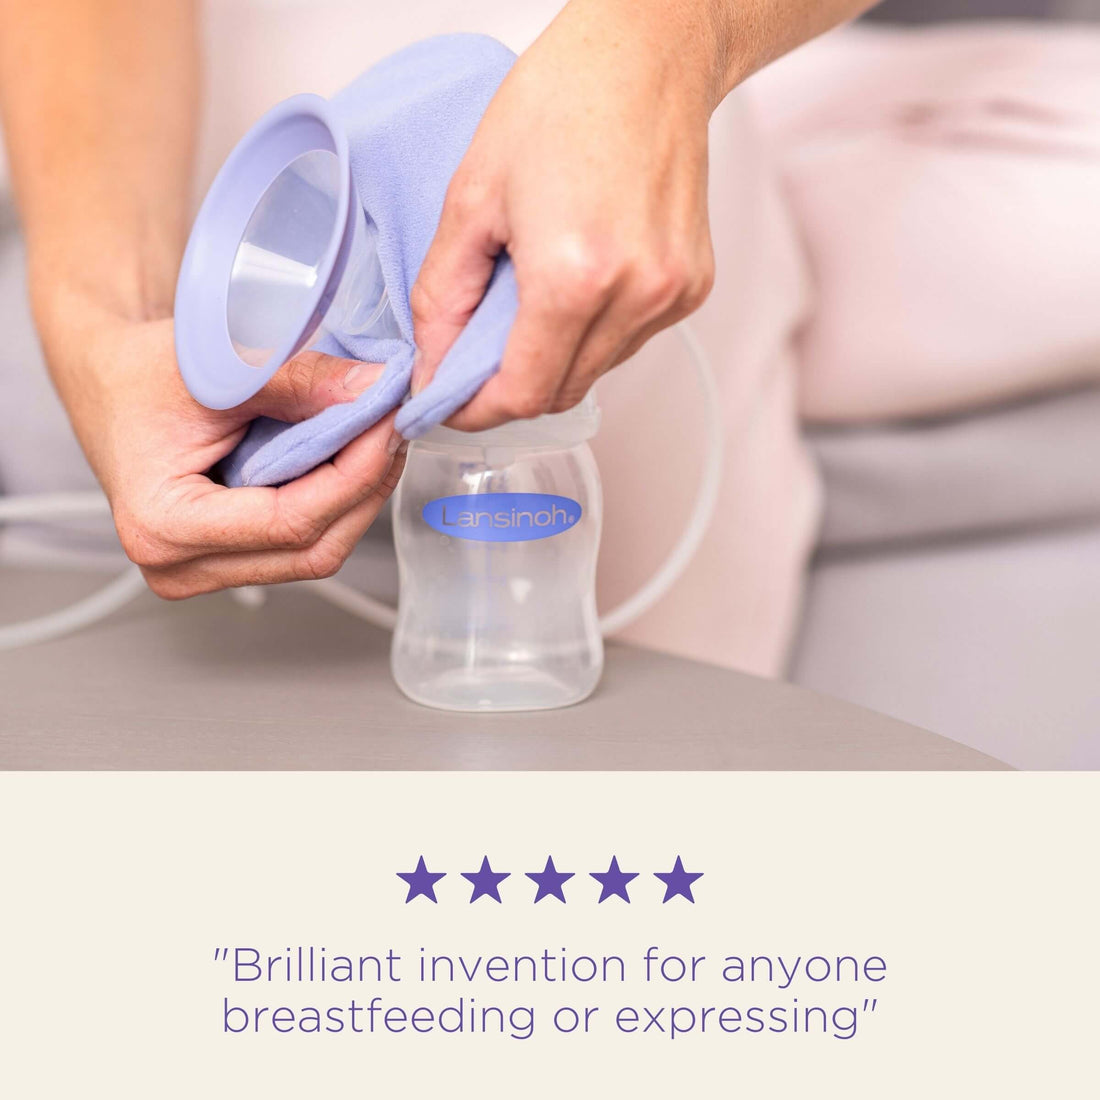 Lansinoh Thera Peral 3 in 1 Breast Therapy Reusable Treatment Packs